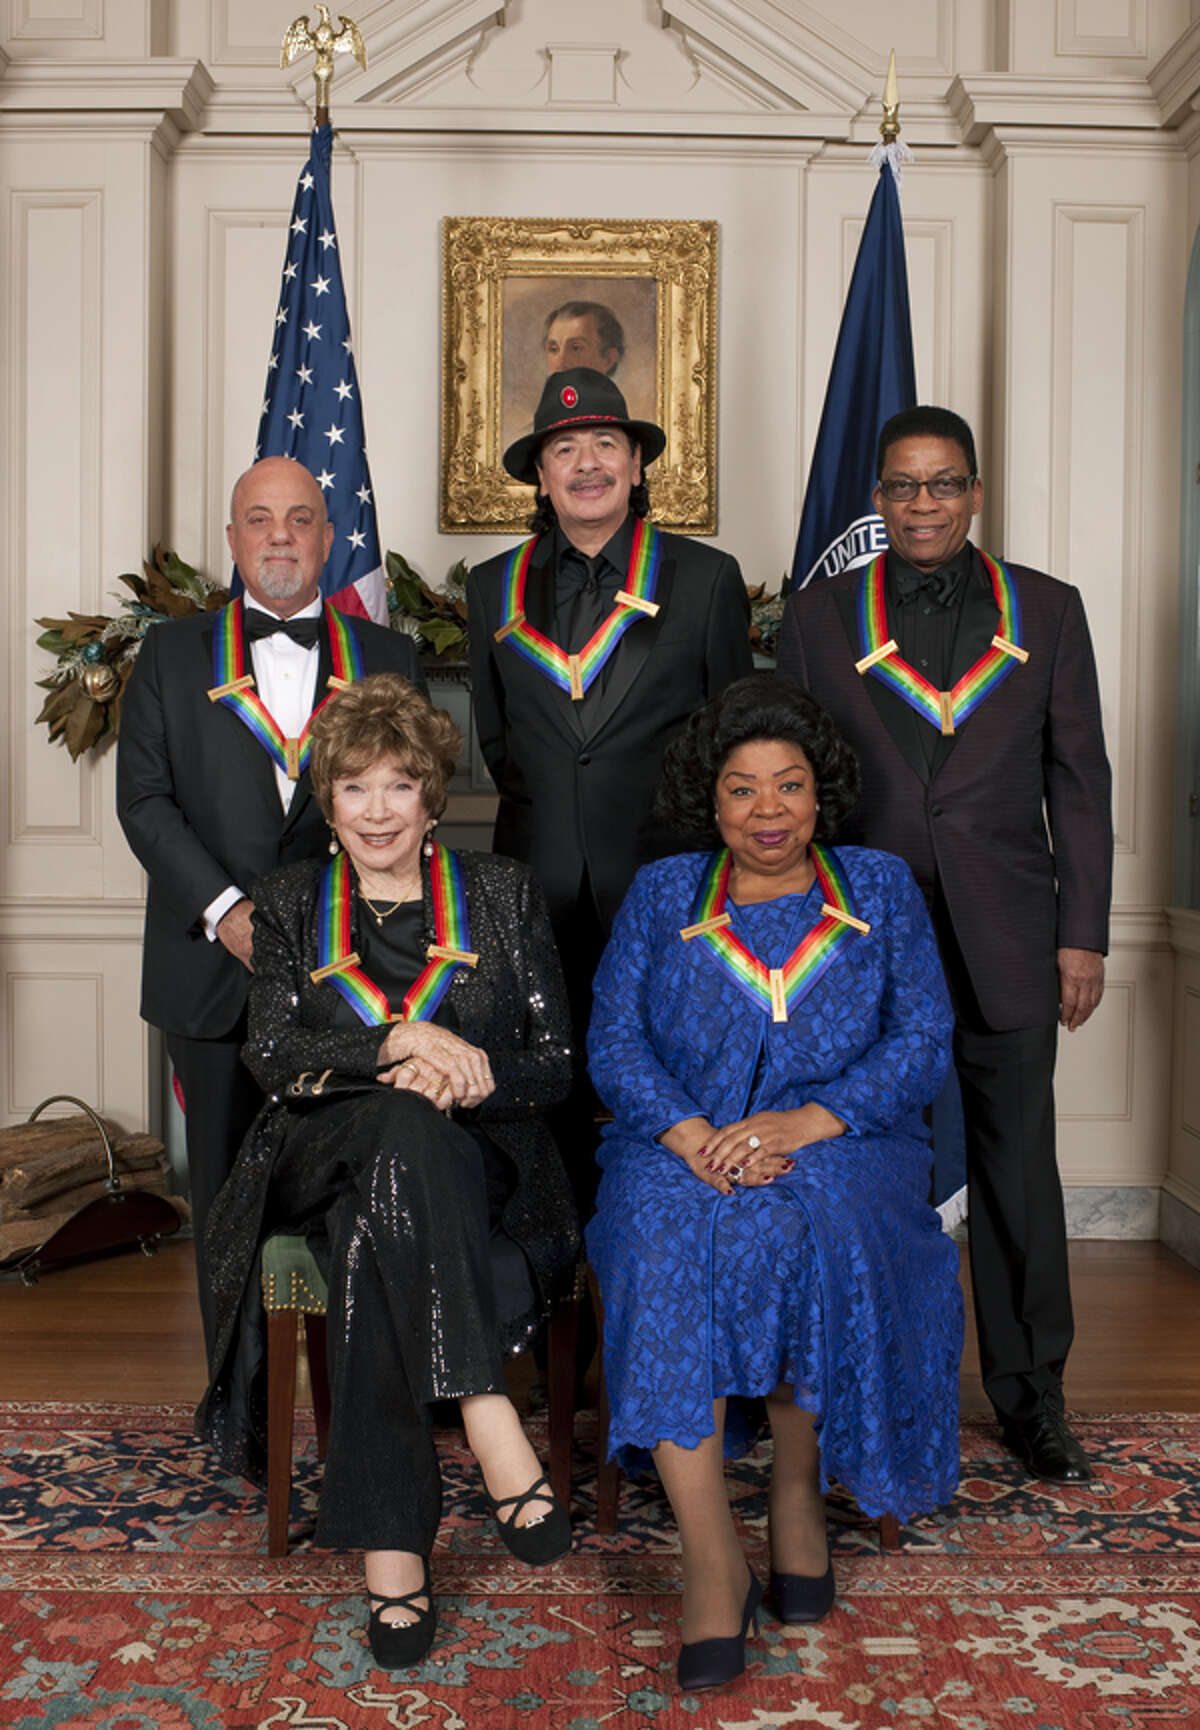 WASHINGTON - DECEMBER 7: The 36th Annual Kennedy Center Honors -- (From left to right) Seated: Actress Shirley MacLaine, opera singer Martina Arroyo, Standing: pianist, singer and songwriter Billy Joel, musician and songwriter Carlos Santana and pianist, keyboardist, bandleader and composer Herbie Hancock will receive honors for 2013 on THE 36TH ANNUAL KENNEDY CENTER HONORS, to be broadcast Sunday, Dec. 29 (9:00-11:00 PM, ET/PT) on the CBS Television Network.